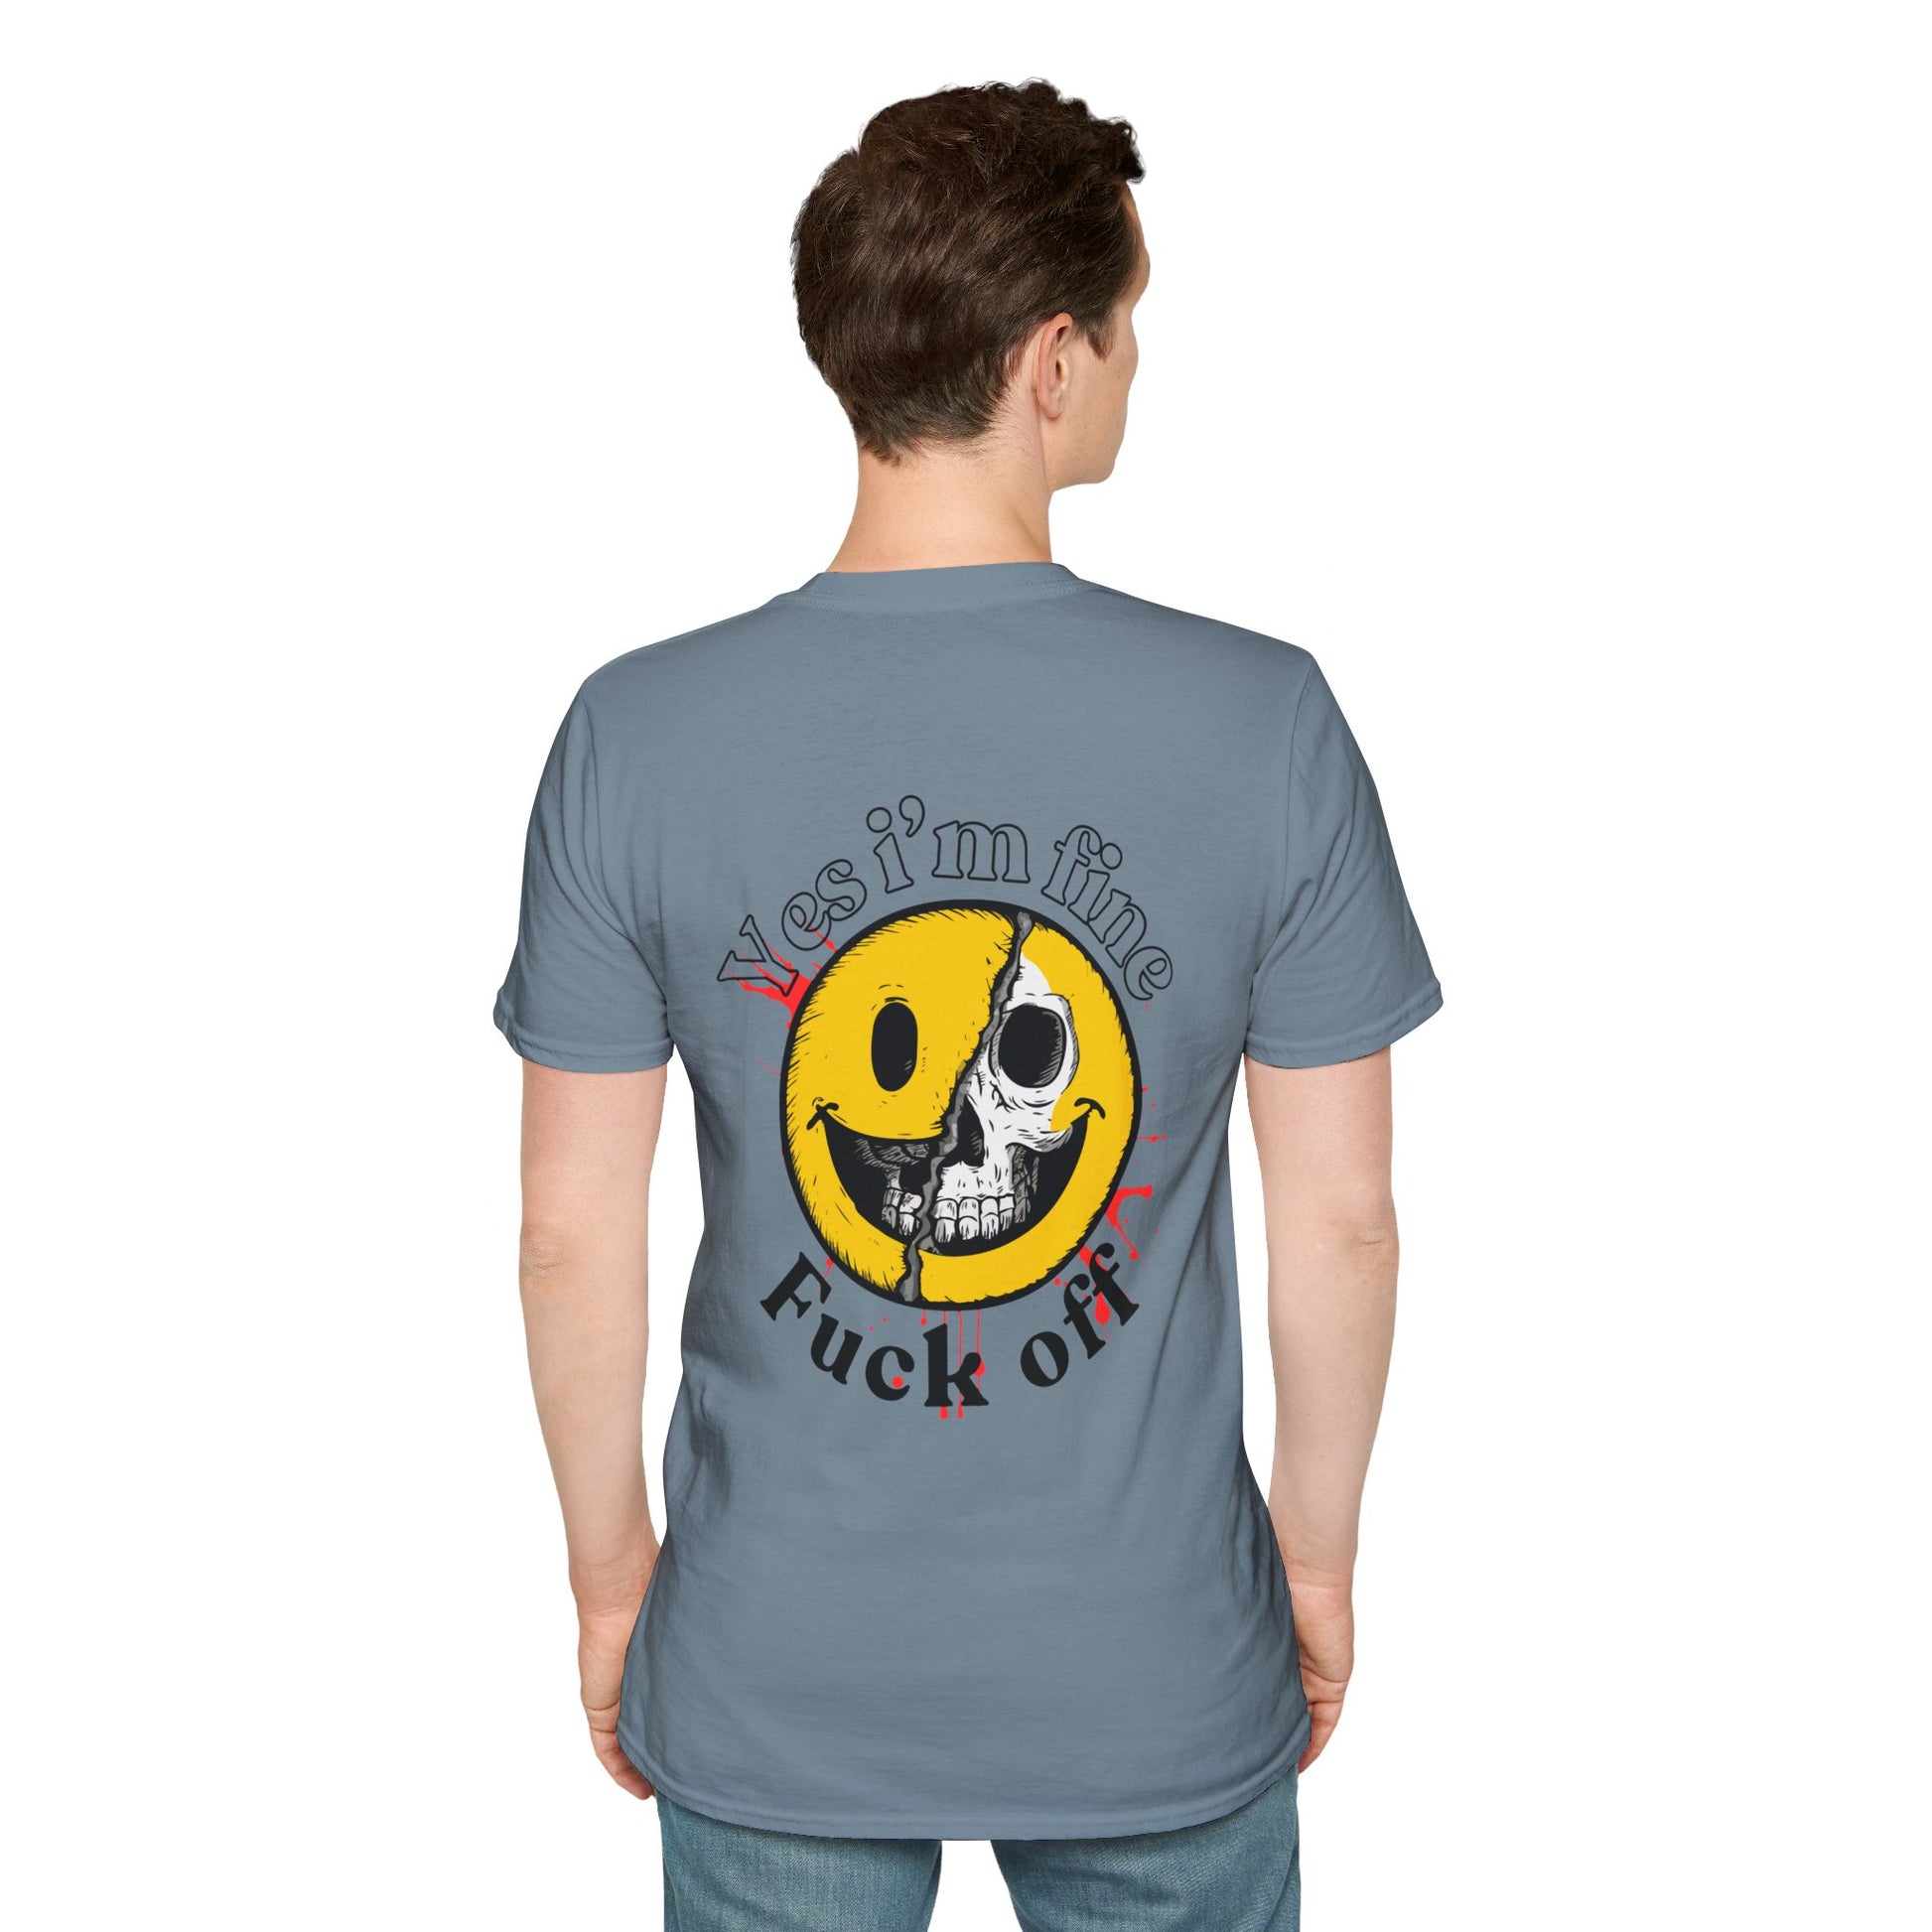 Stone Blue T-shirt with a half smiley, half skull design and bold text 'Yes I'm Fine' and 'Fuck Off' 